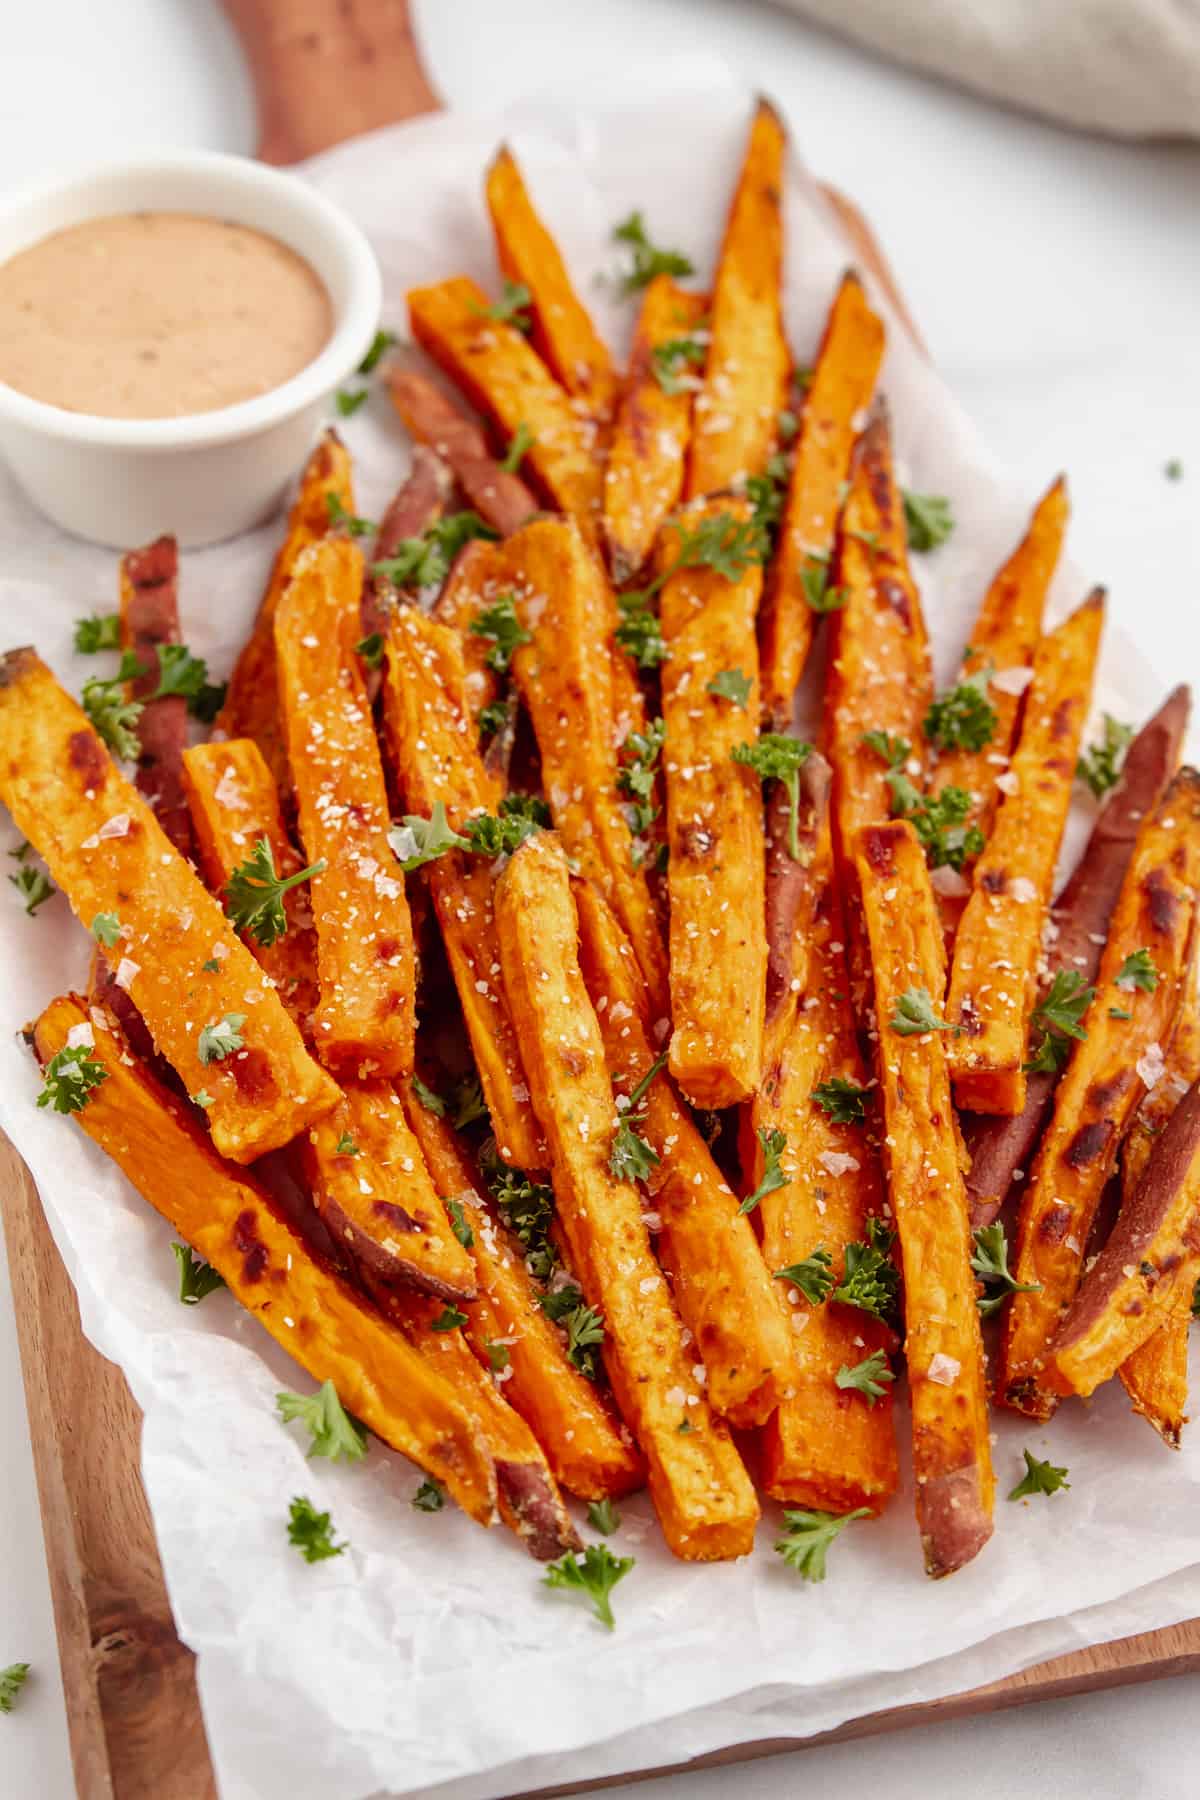 Baked sweet potato fries topped with salt and fresh herbs and a side of dipping sauce.